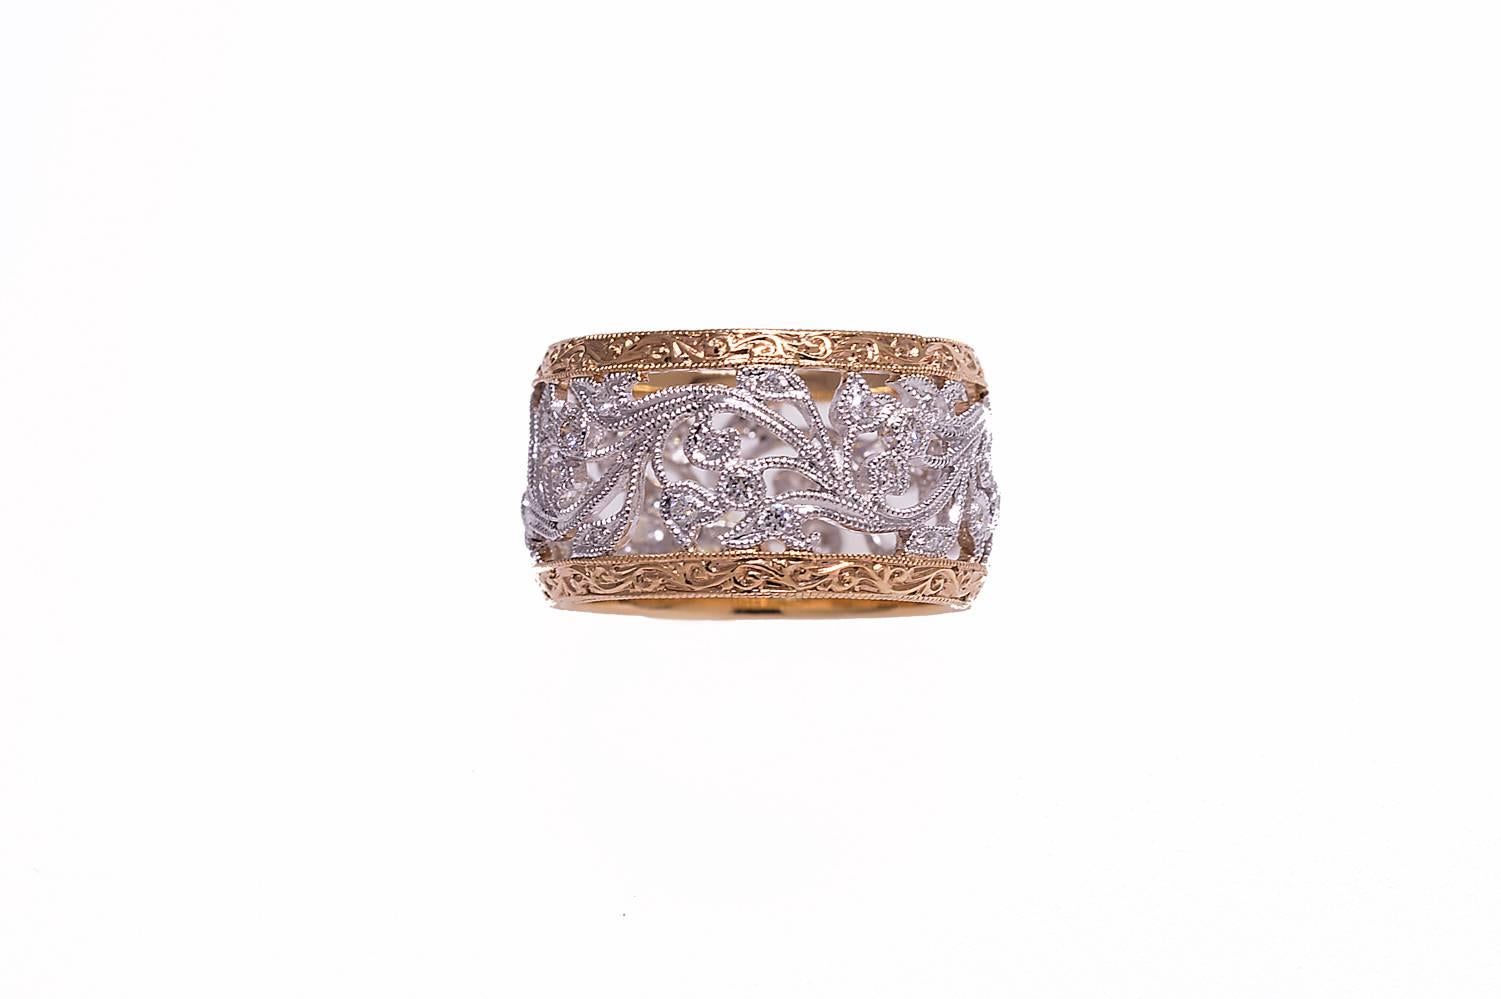 Platinum and 18K rose gold diamond band ring. The diamonds weigh combined 0.34 carat, G color, VS clarity. The ring is size 6.5